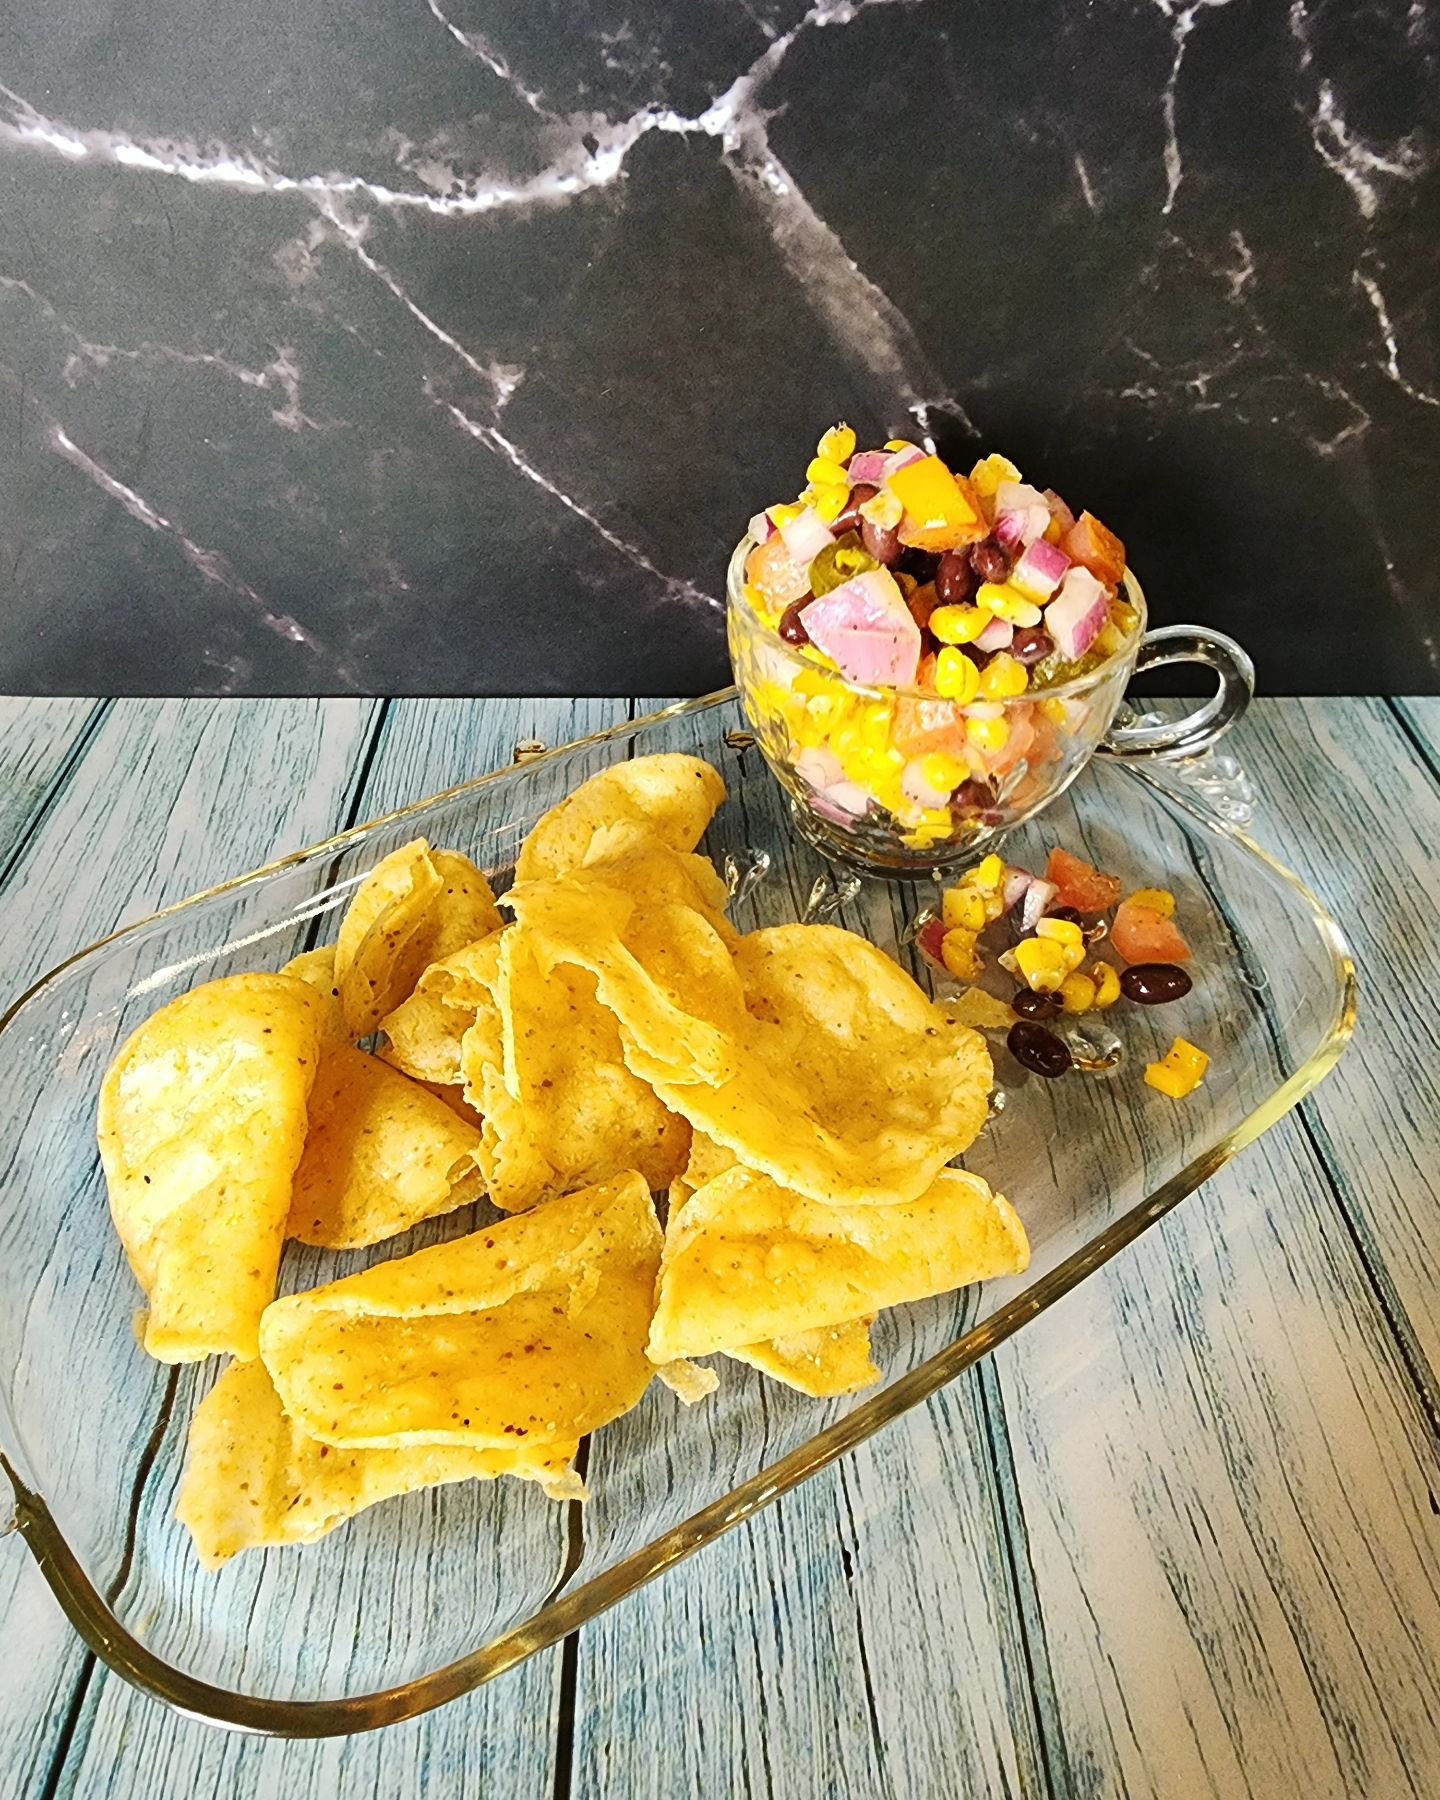 tiffany made some
✨️cowboy caviar✨️ 
to test out this week, and we've had great feedback!
just a couple left! 
》tomatoes, onions, corn, beans, peppers, [housemade] dressing 🤤🤤
》don't forget your tortilla chips on the side!

here until 6!

618-491-0